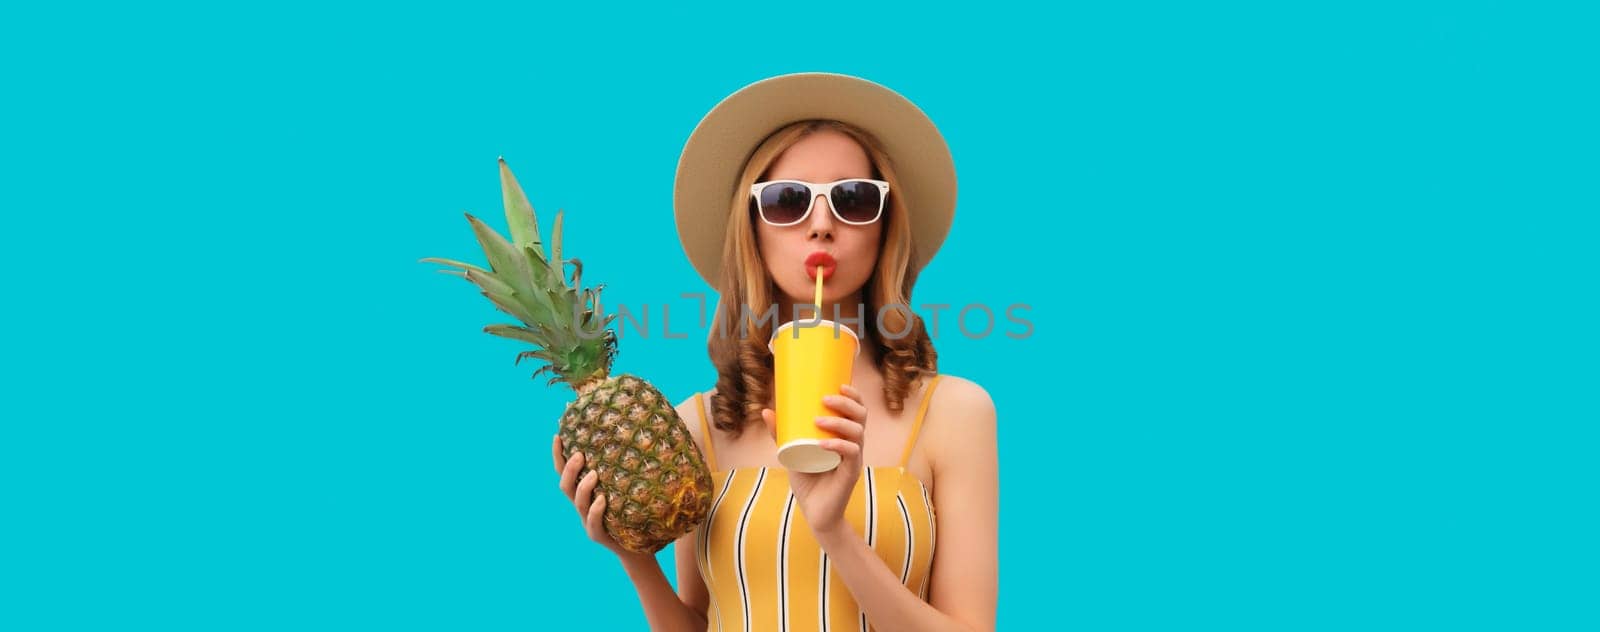 Summer bright portrait of stylish young woman drinking fresh juice holding pineapple fruit in straw hat, sunglasses on colorful blue studio background